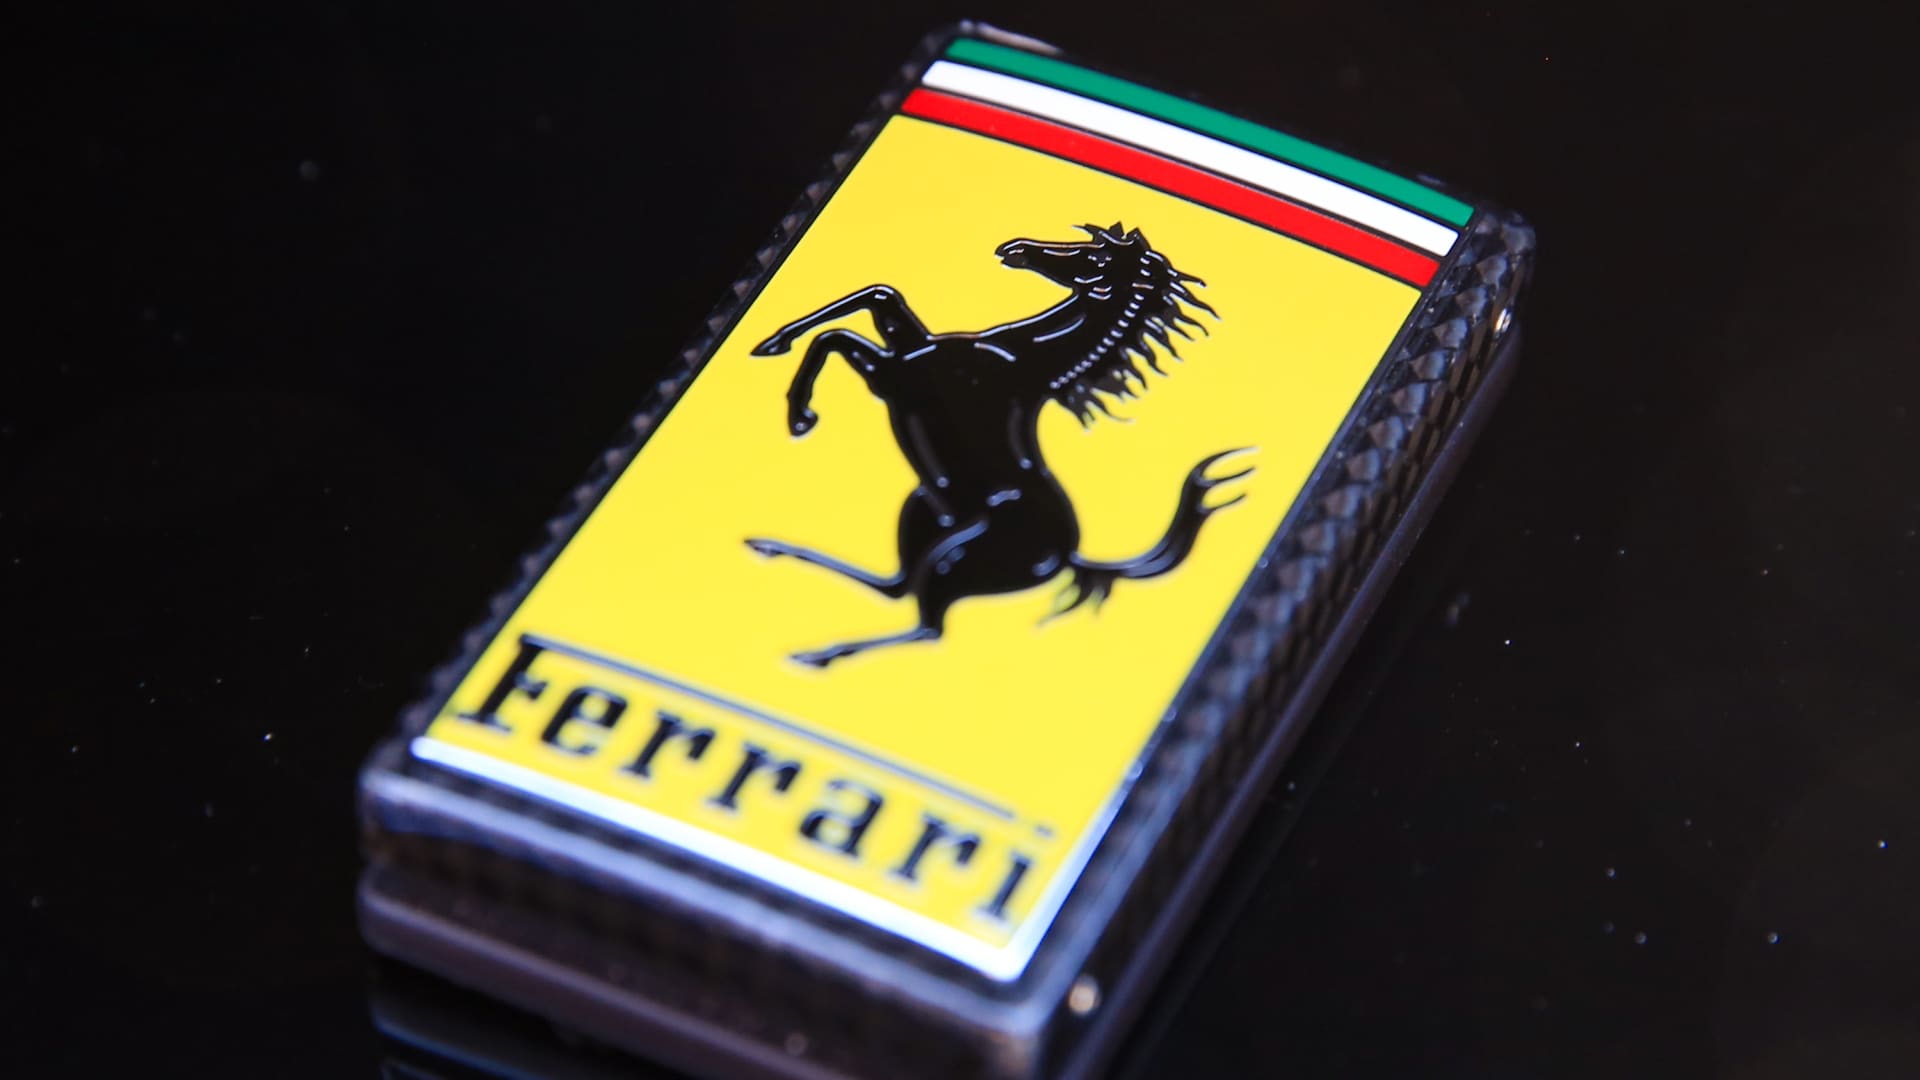 Ferrari finishes a record year by topping Wall Street’s estimates Auto Recent